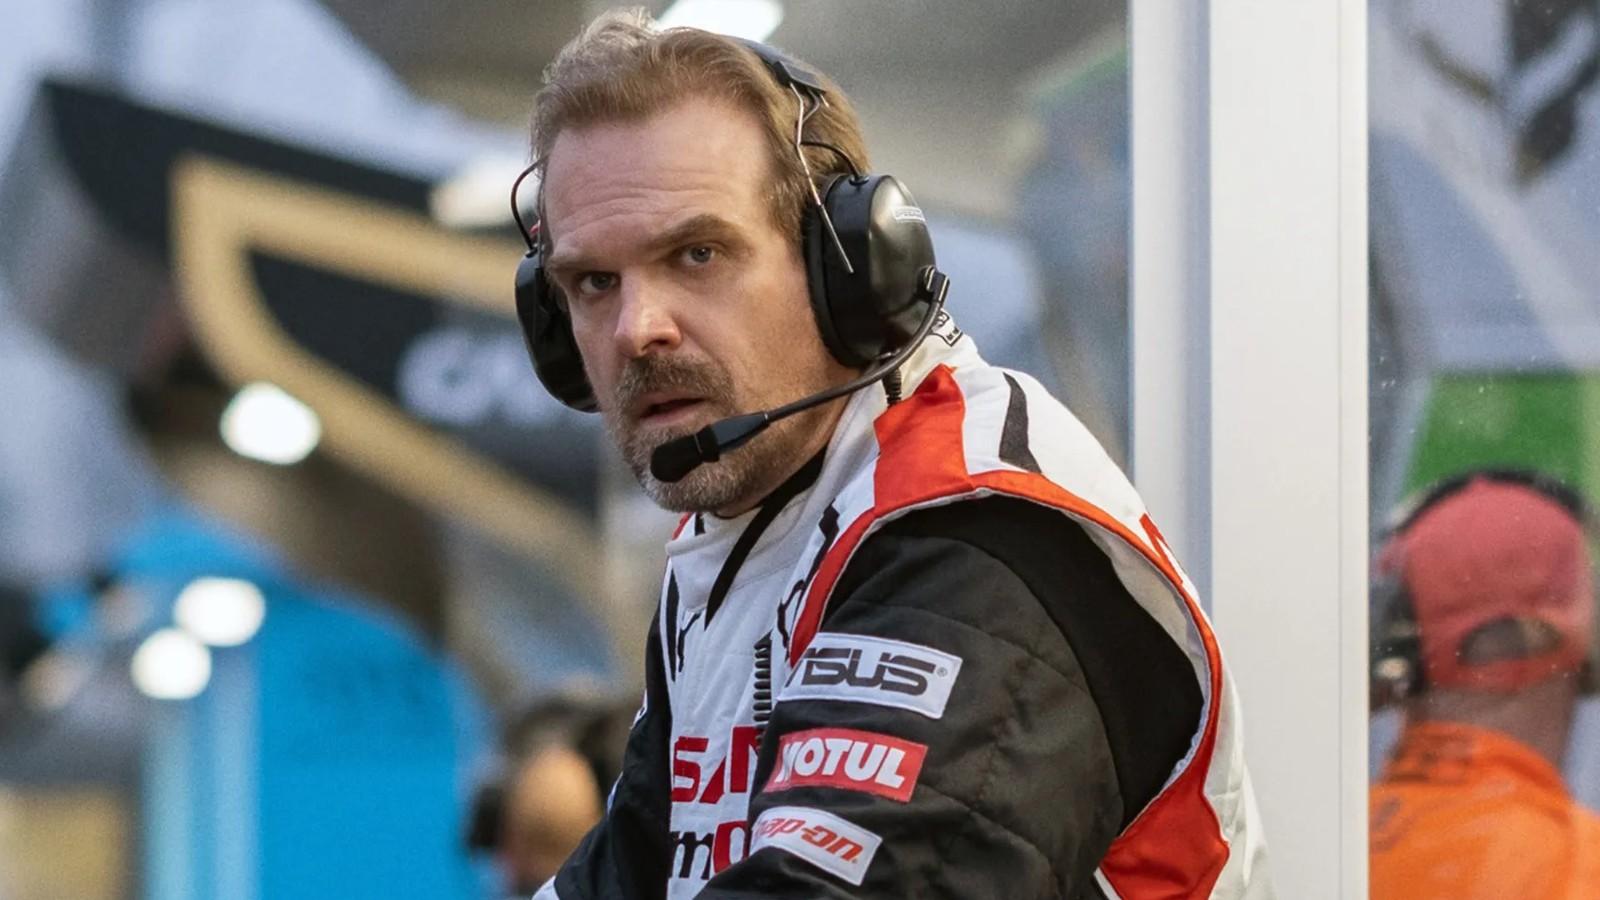 David Harbour watching the track in Gran Turismo.